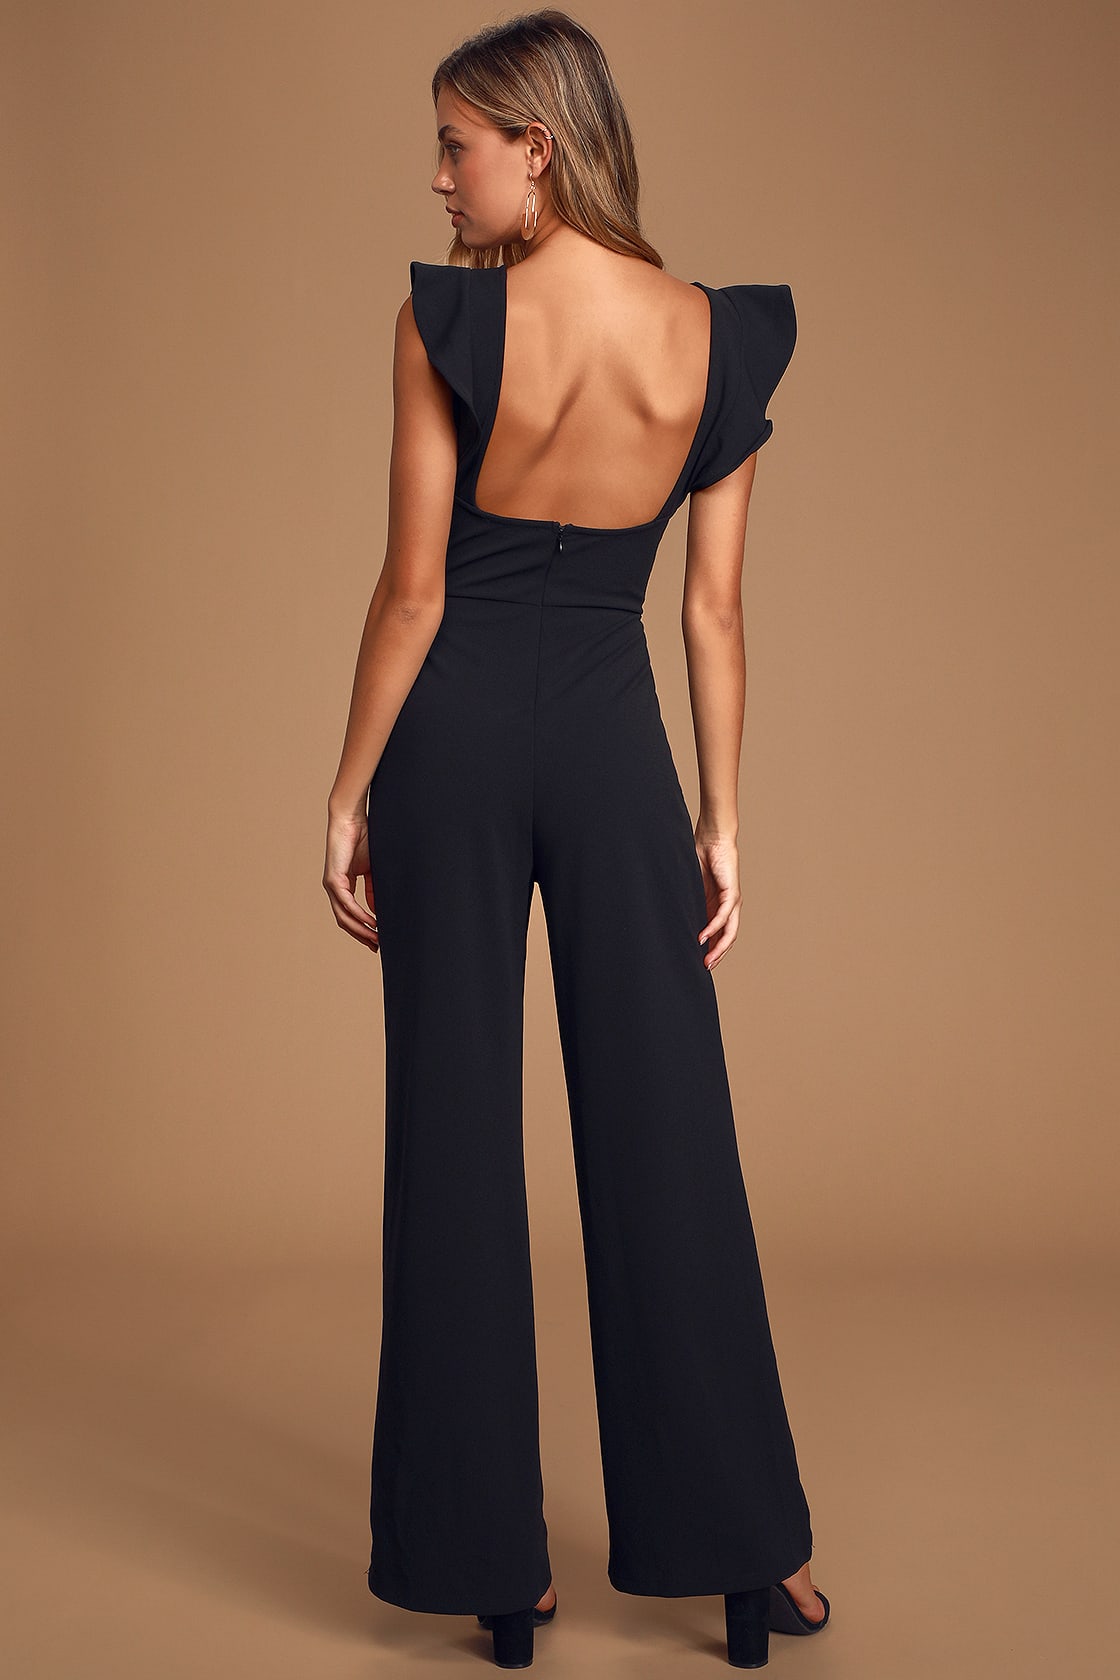 Black Jumpsuit for 40th Birthday Dinner Party